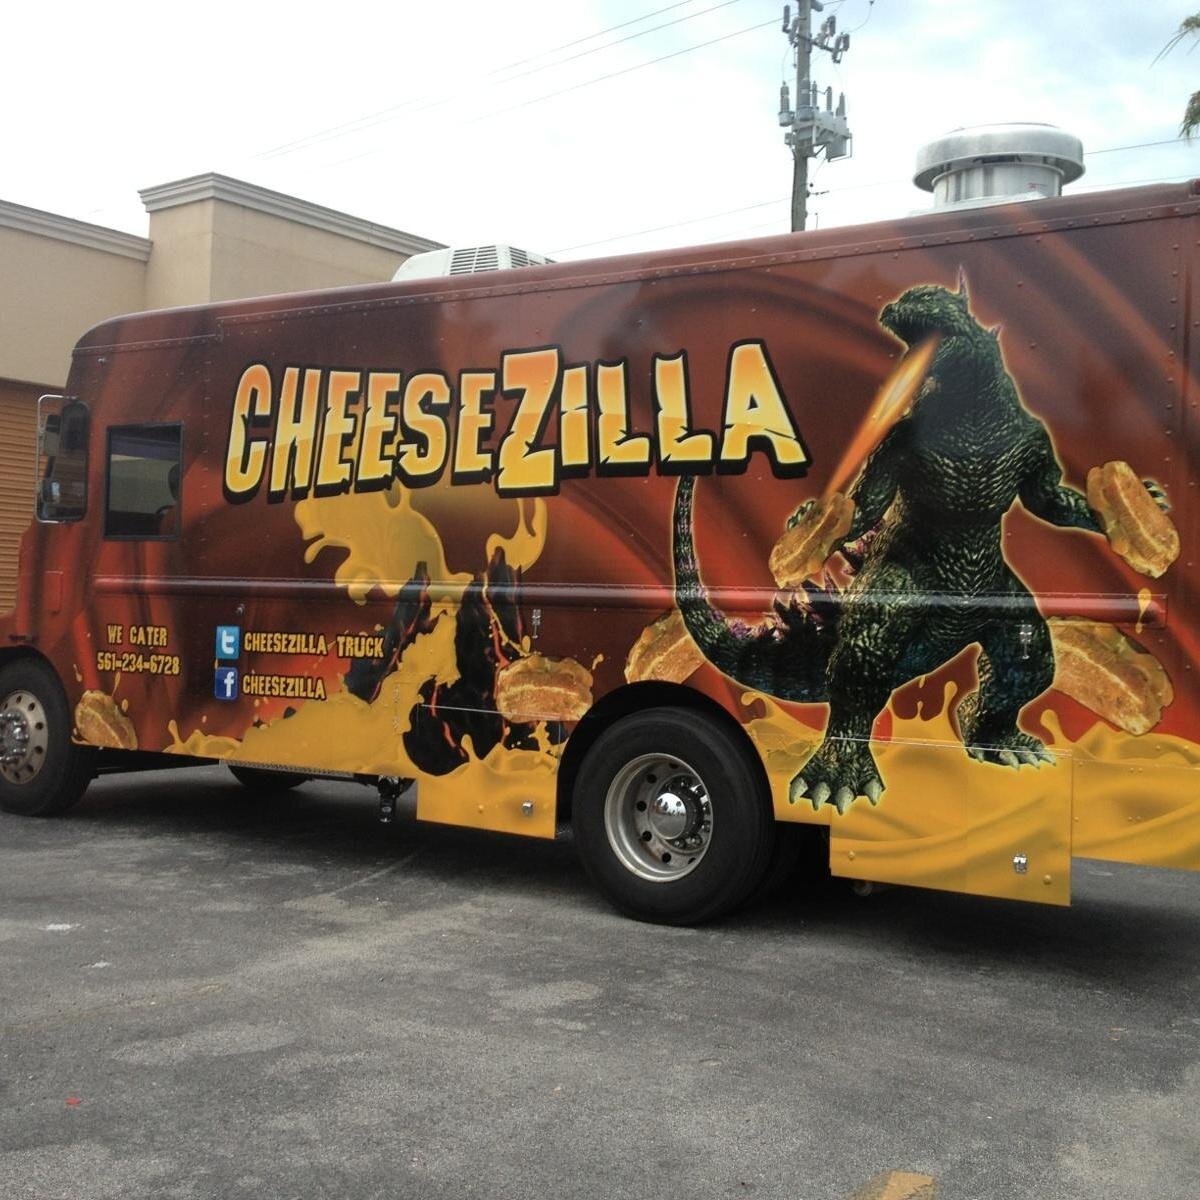 Bringing you tasty cheesy delicious food to a place near you!